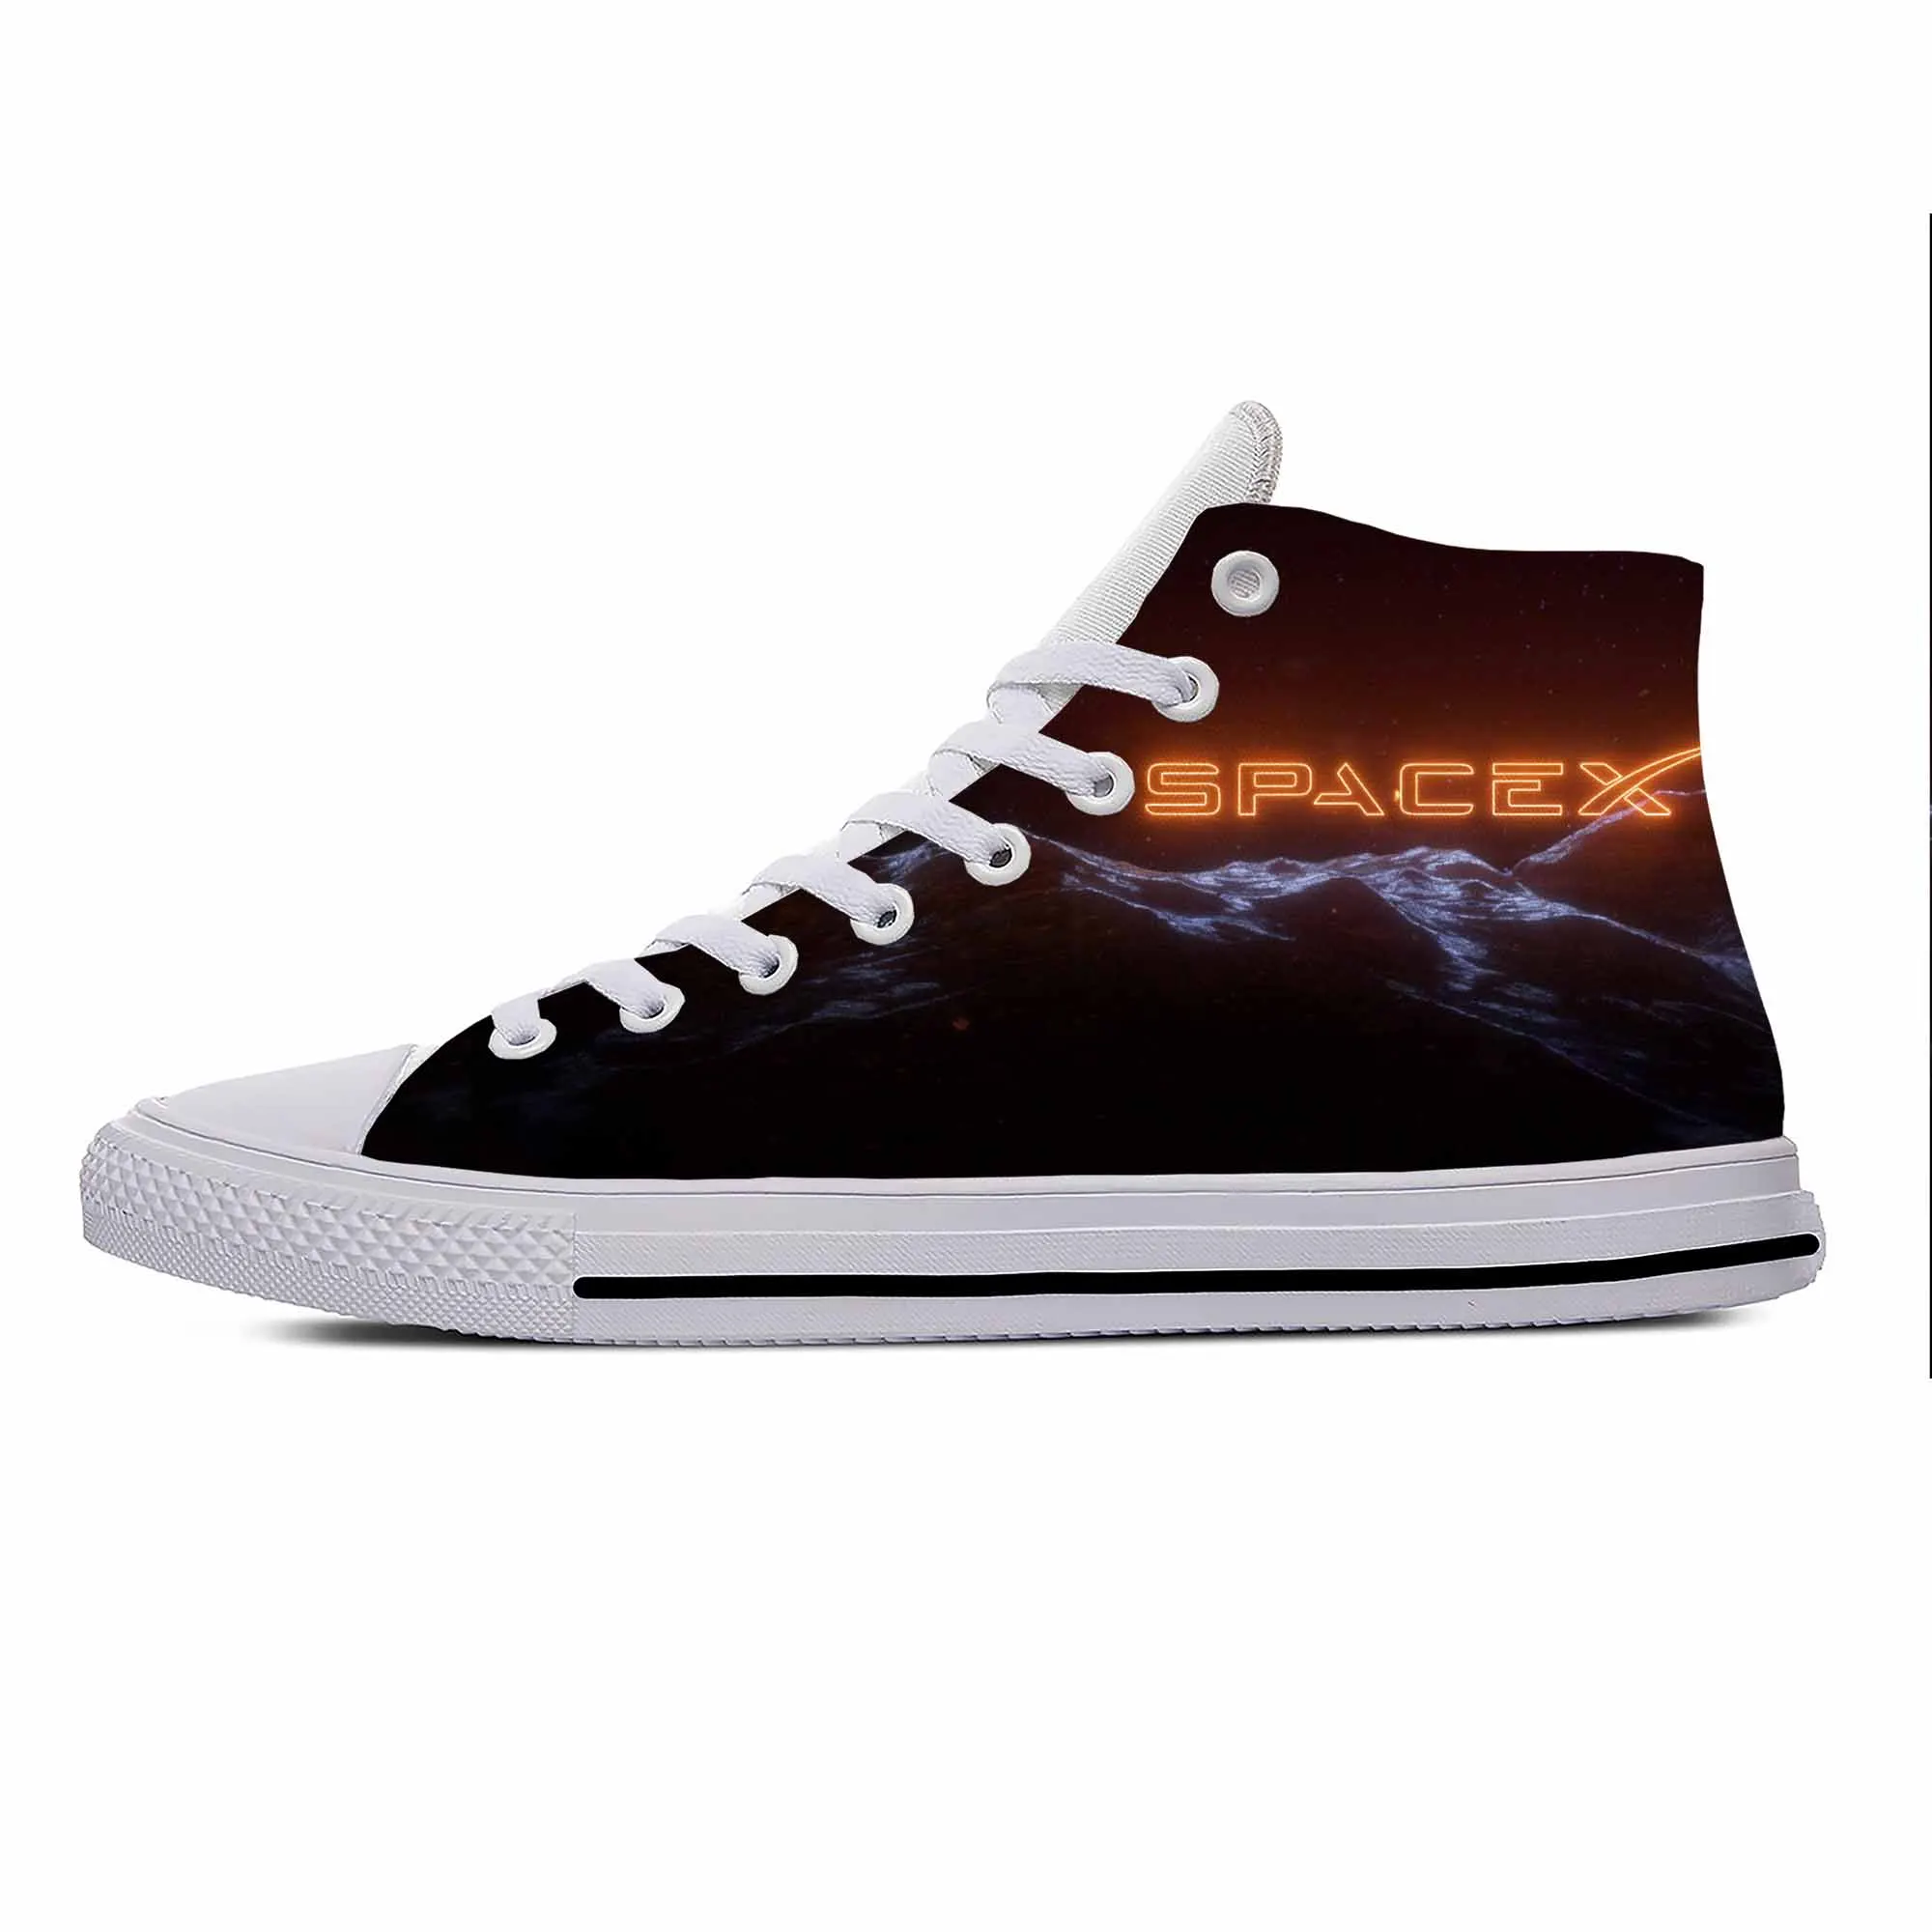 

Anime Manga Cartoon SpaceX Space X Funny Fashion Casual Cloth Shoes High Top Lightweight Breathable 3D Print Men Women Sneakers